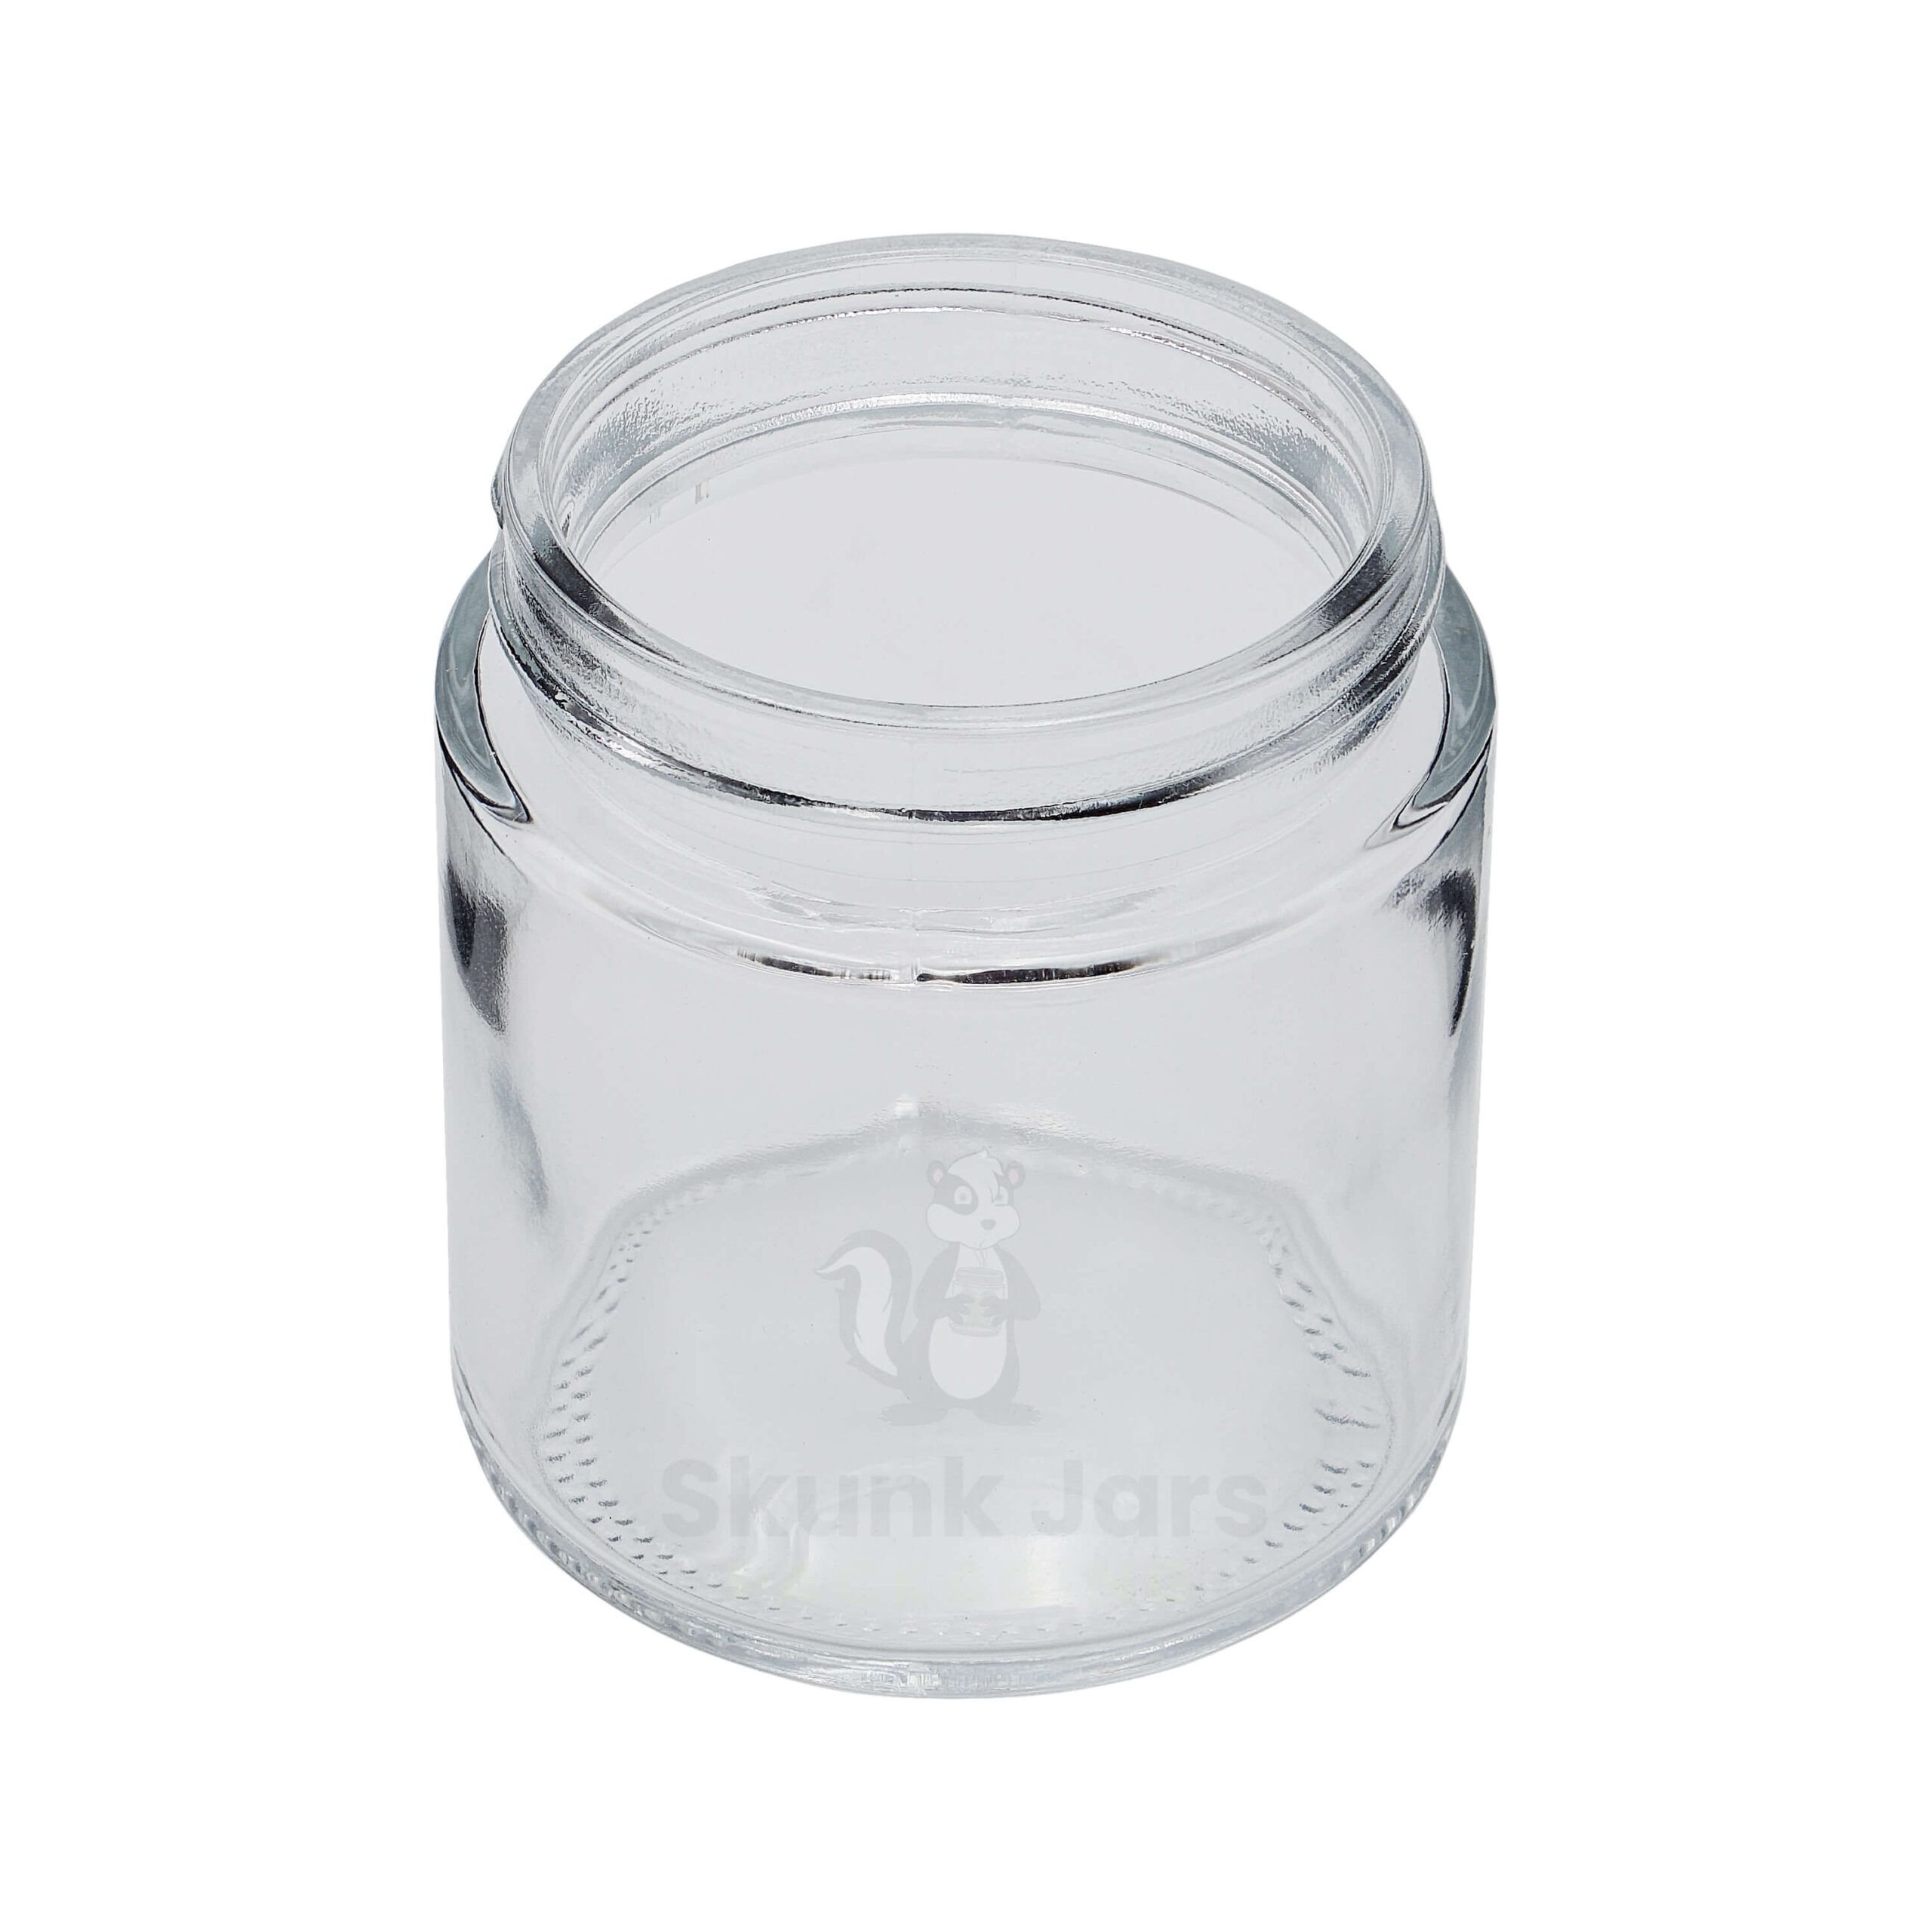 Clear Glass Jar With Black Child Resistant Caps 3oz